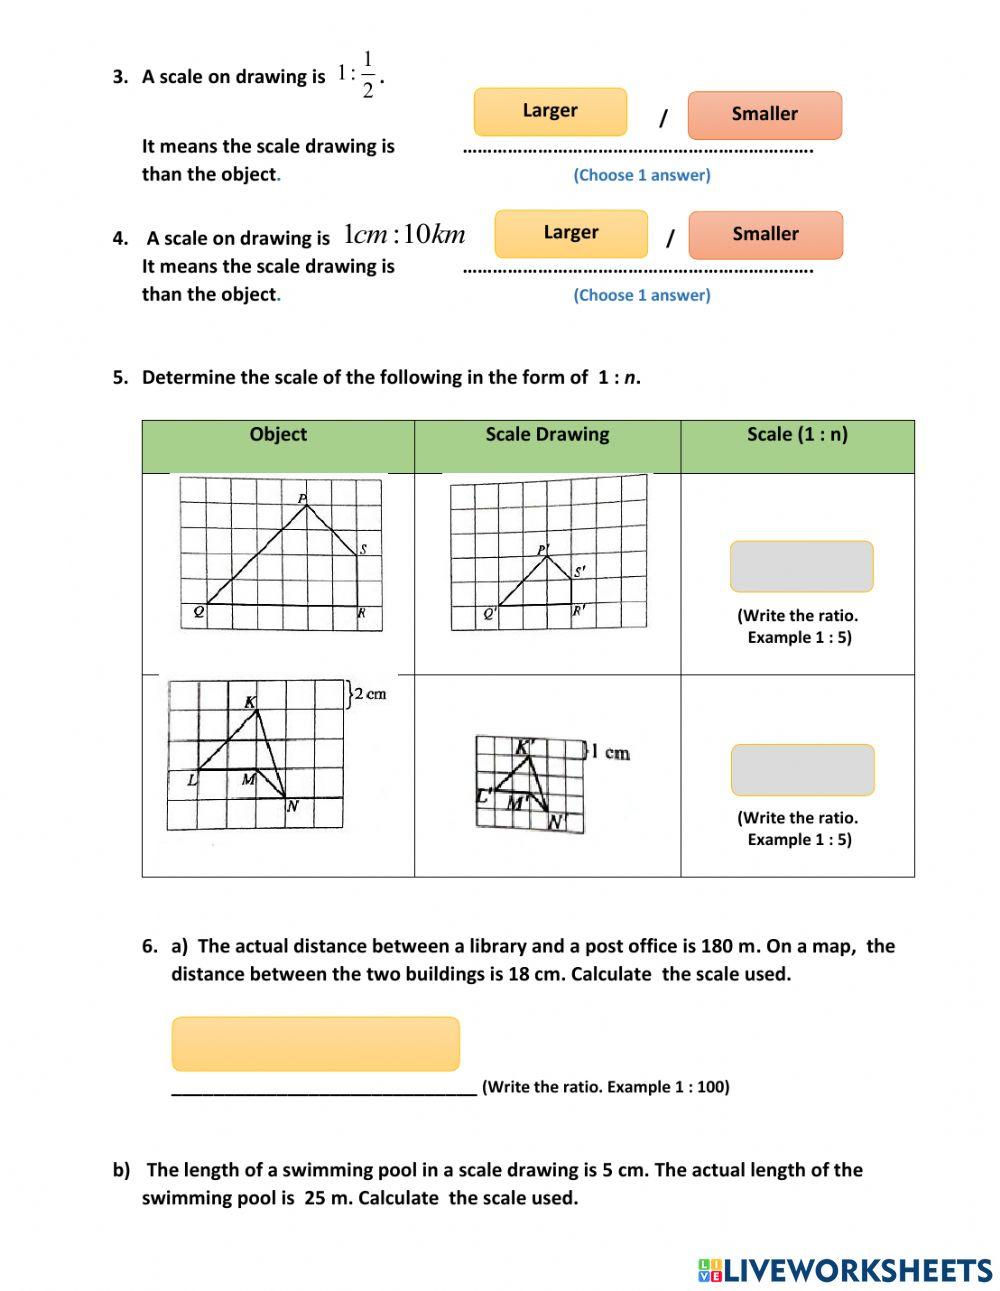 Chapter 3 scale drawings(mathematics form 3)